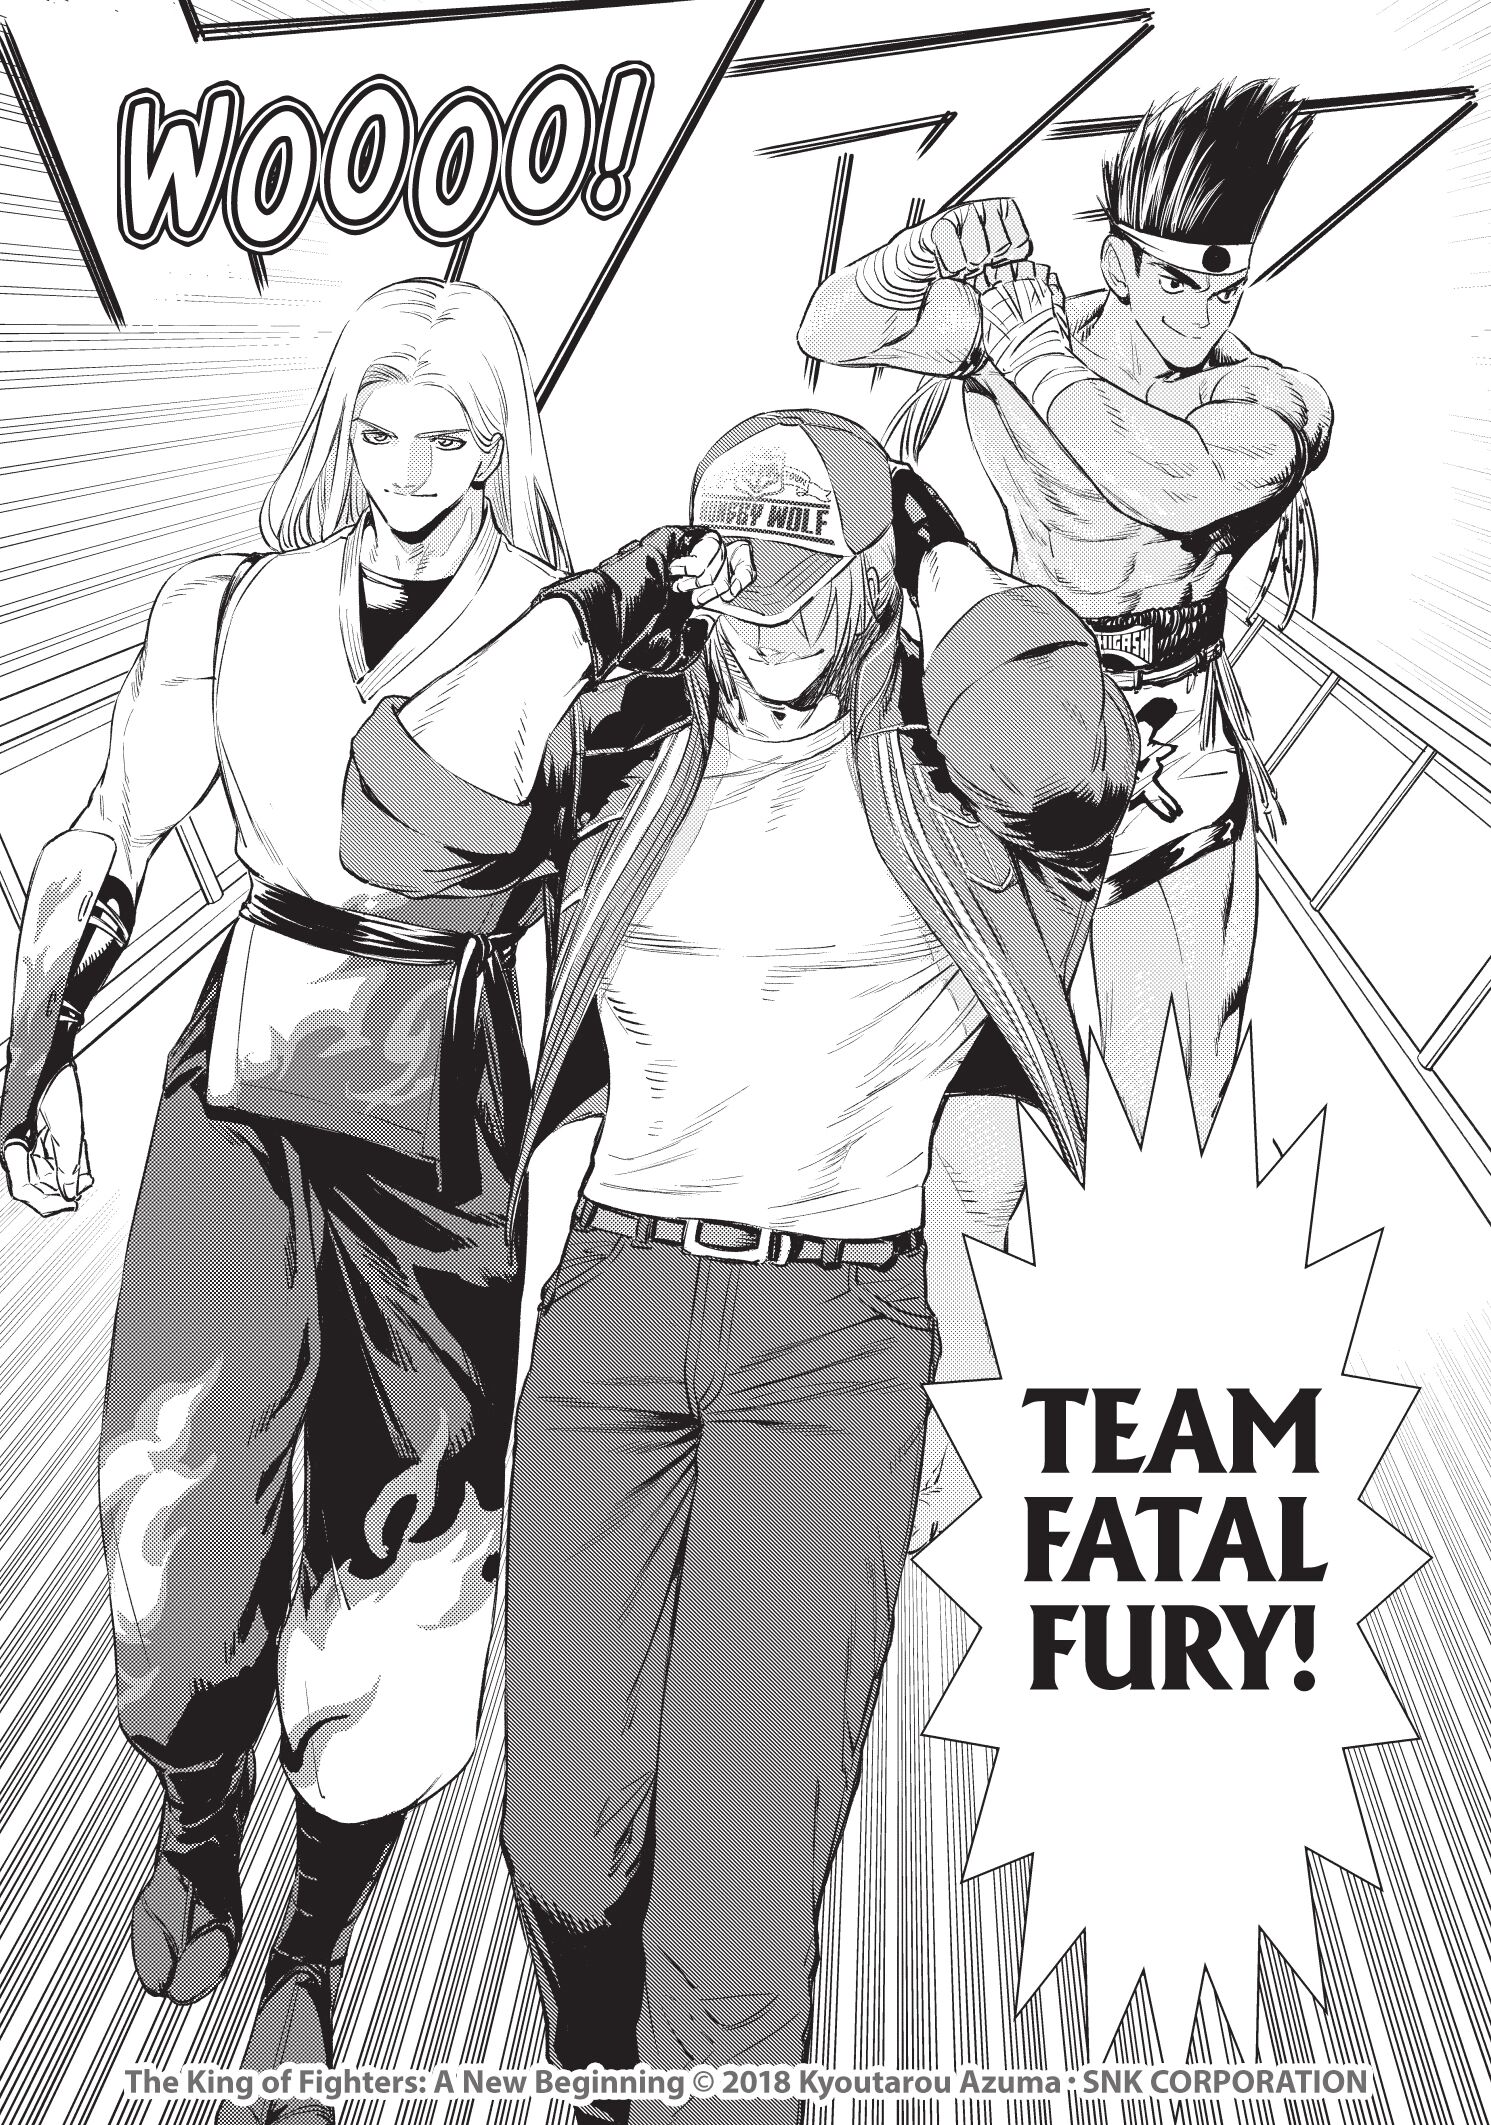 MANGA REVIEW  The King of Fighters: A New Beginning - Volume